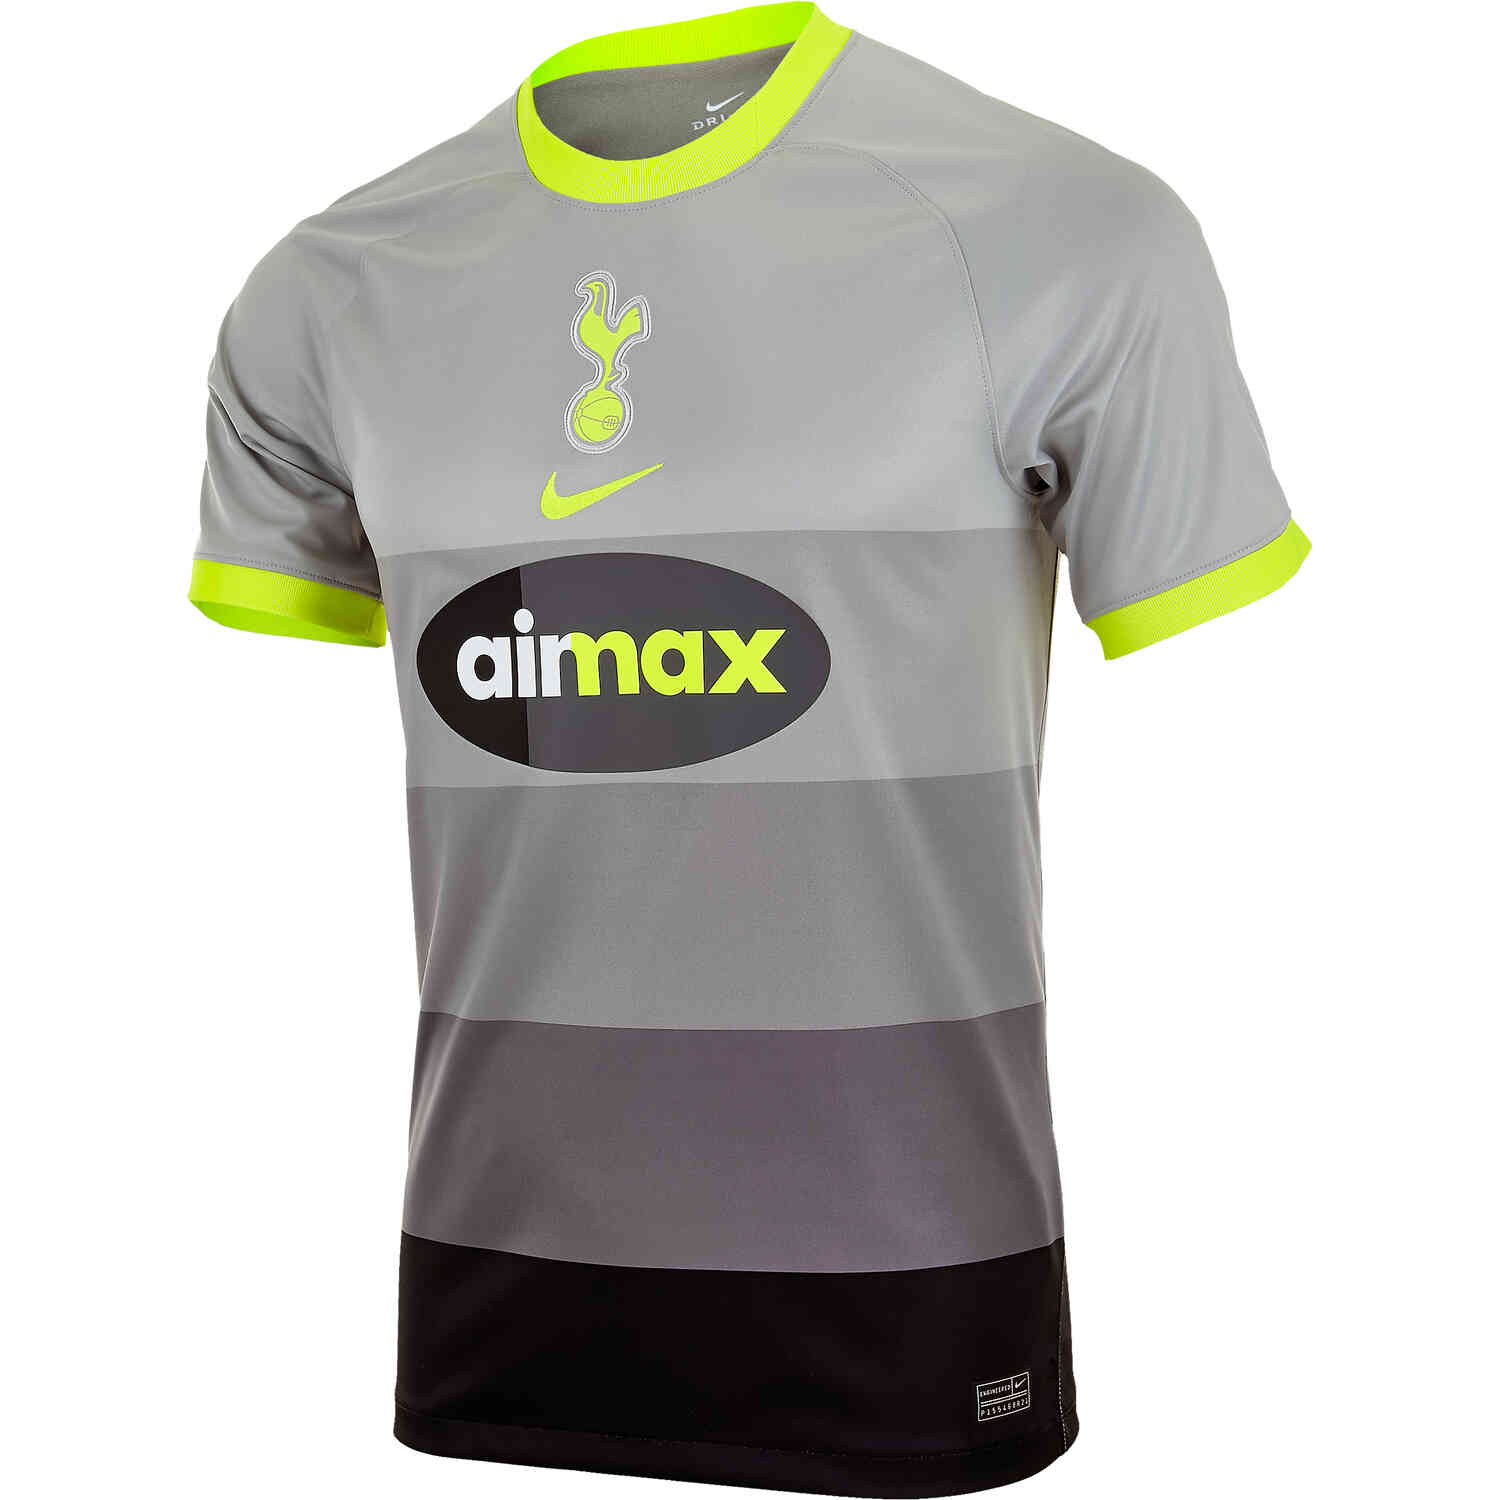 Nike+Tottenham+Hotspur+Jersey+Youth+M+2020+2021+Away+Soccer+CD4520-398+Unisex  for sale online